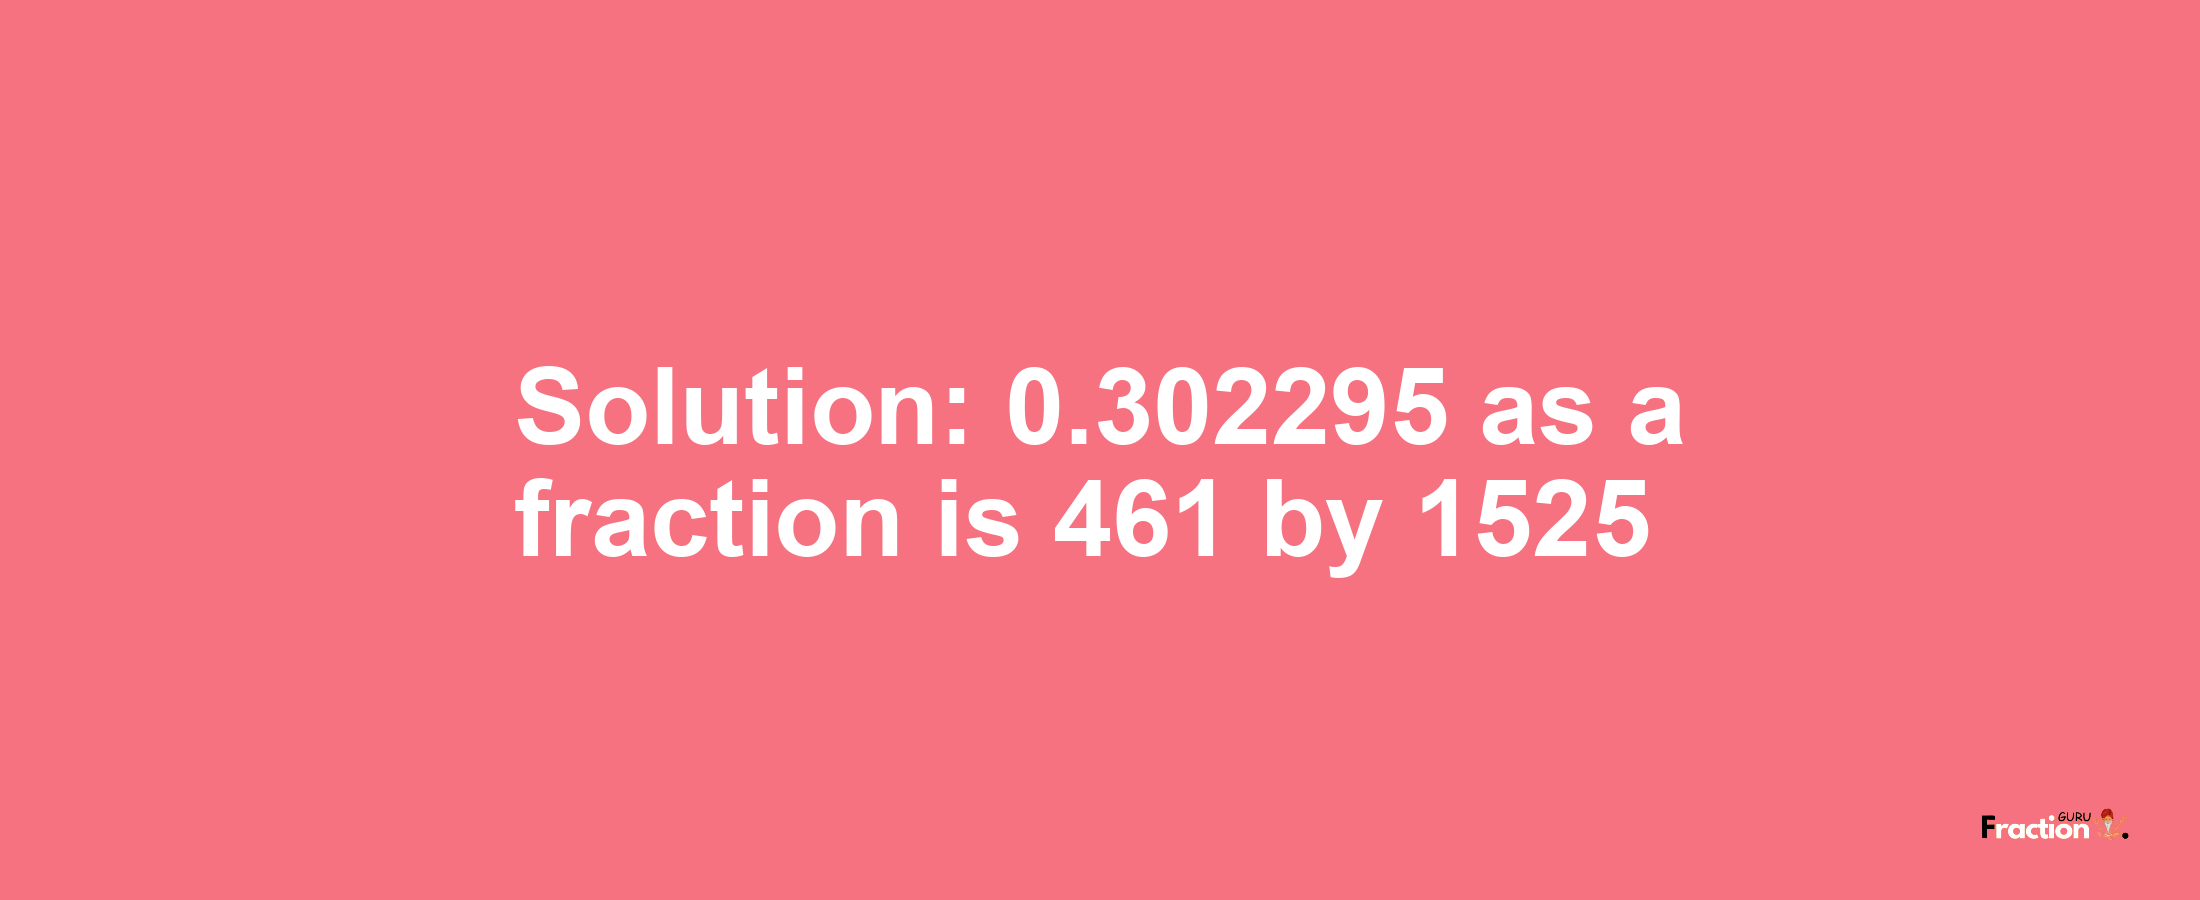 Solution:0.302295 as a fraction is 461/1525